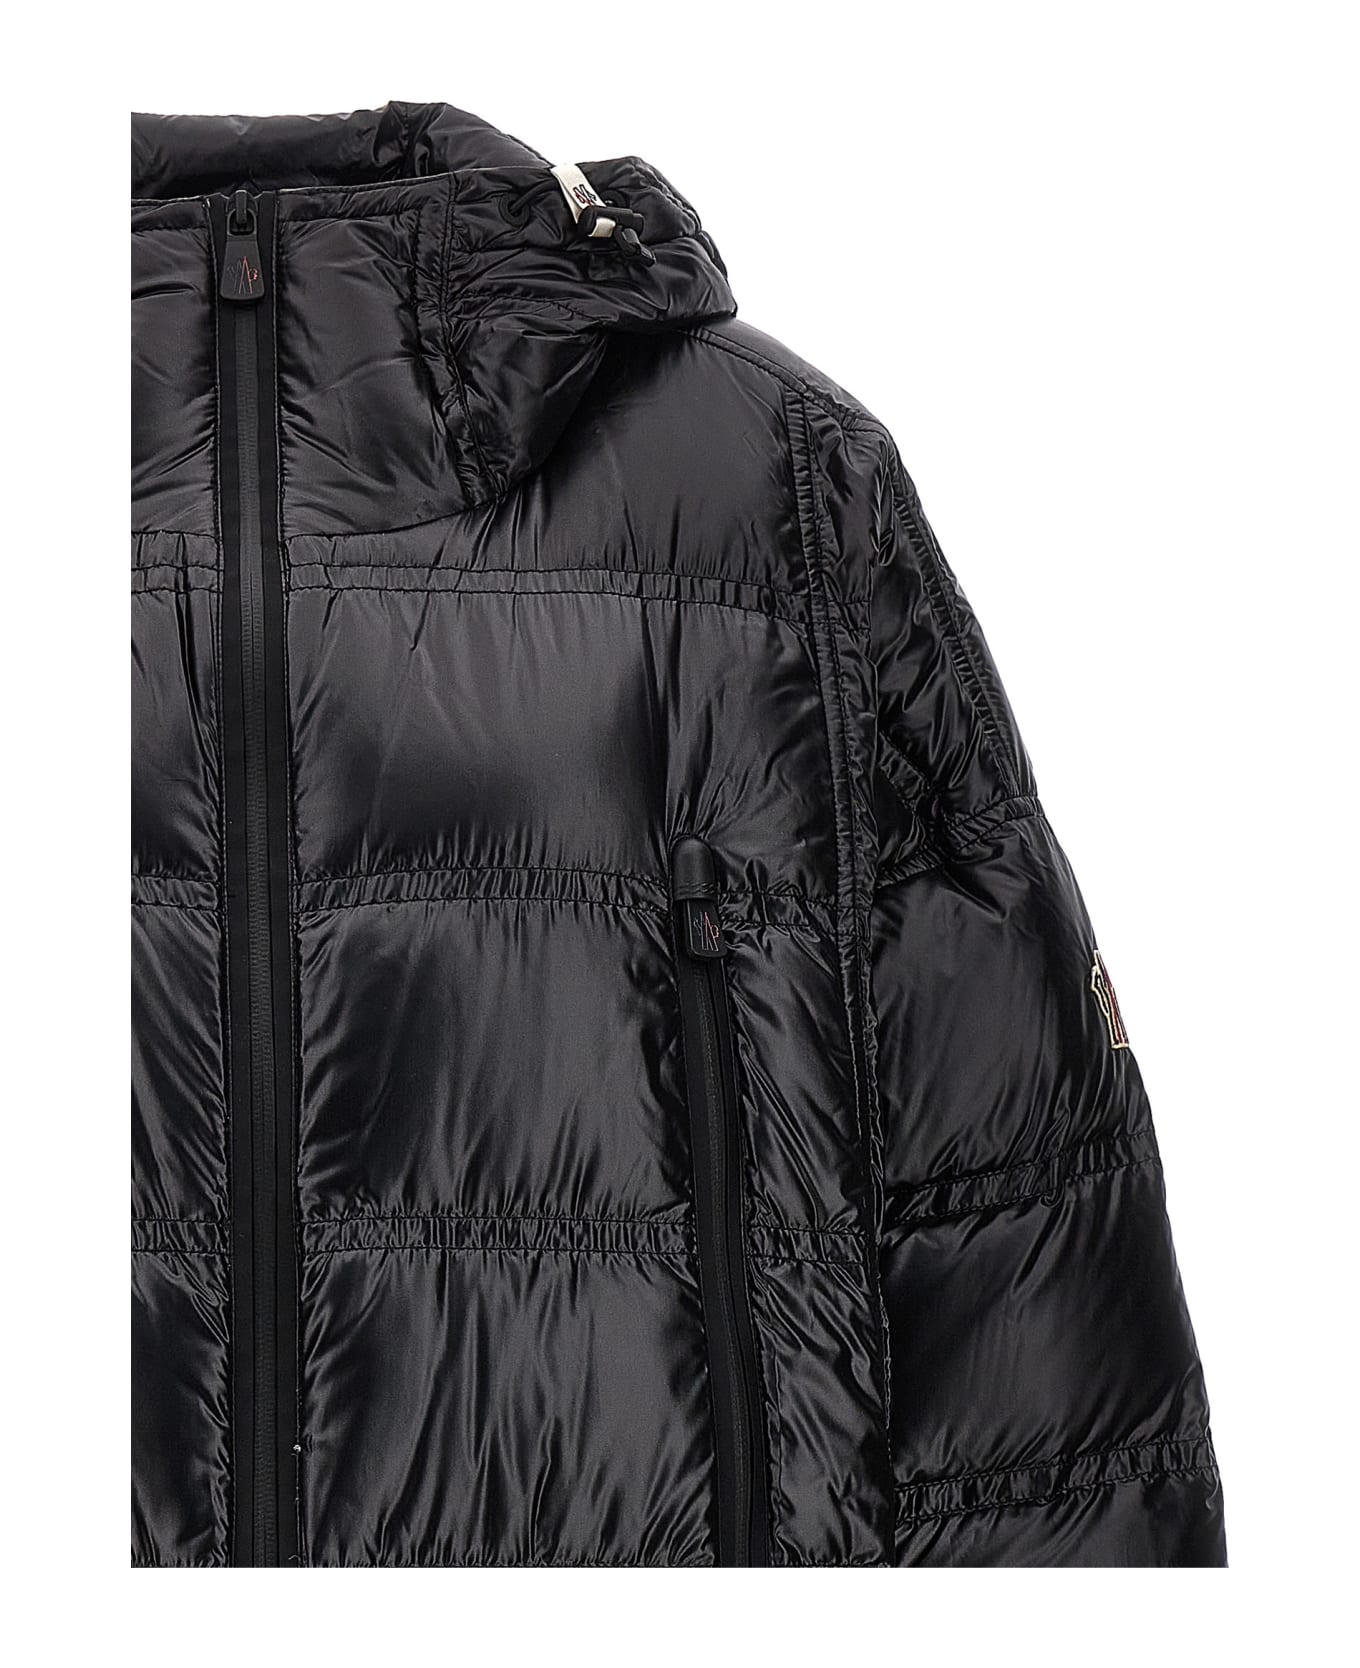 Moncler Grenoble Long Down Jacket 'rochelair' | italist, ALWAYS LIKE A SALE